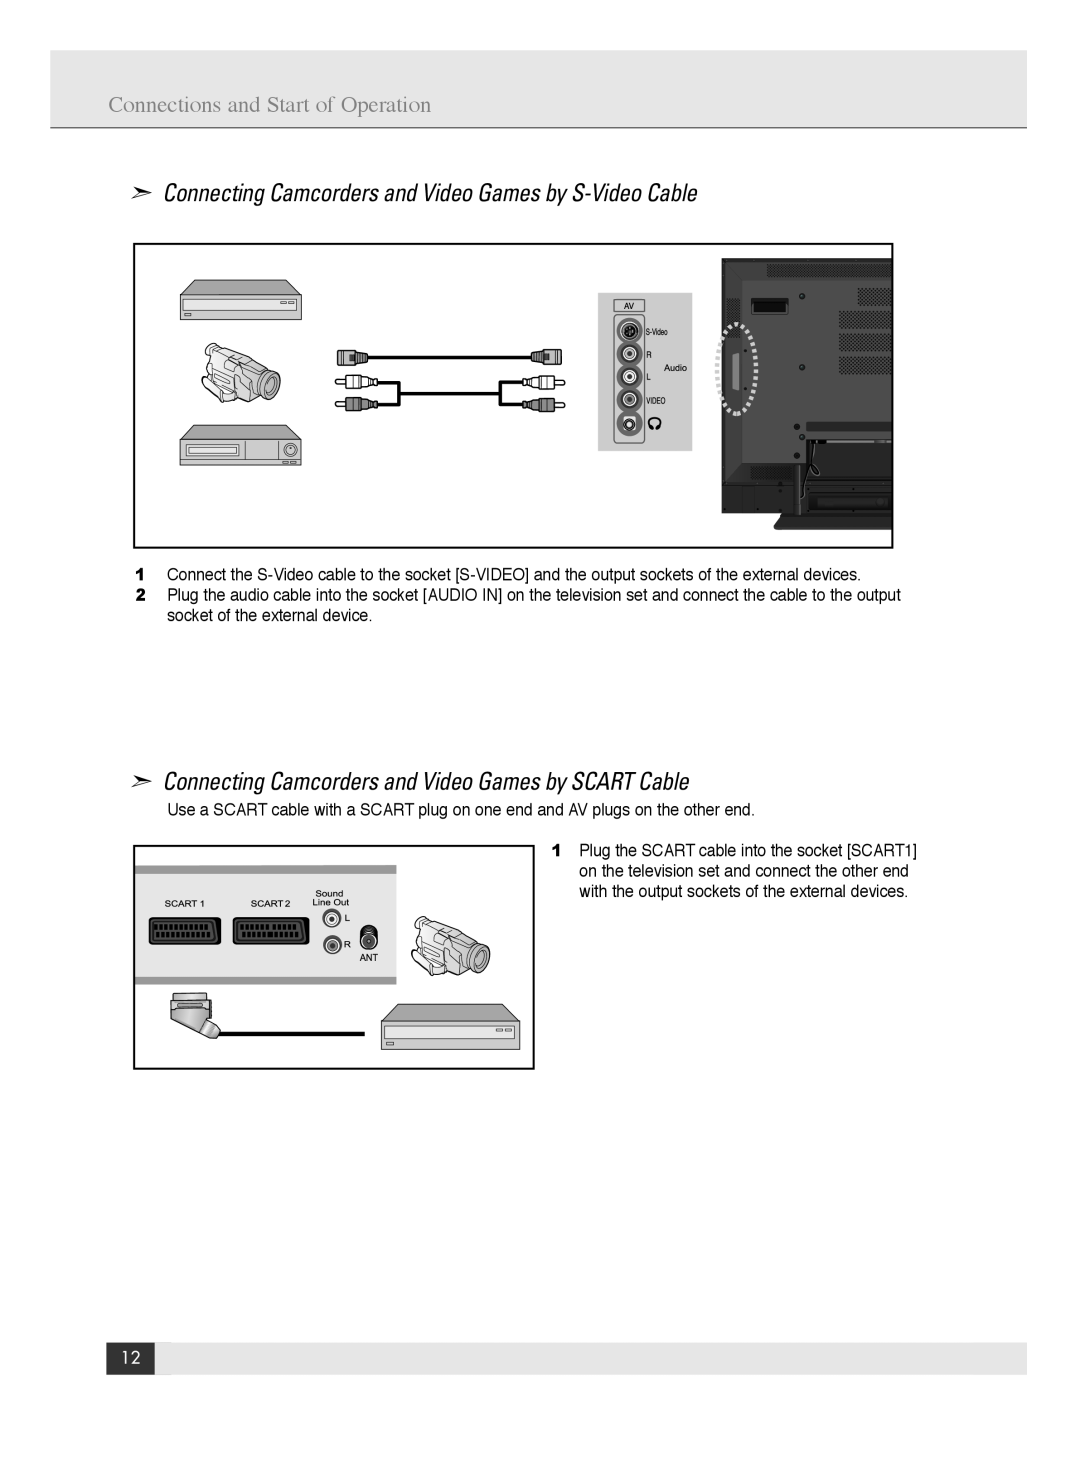 Energy Speaker Systems LTV46DA Connecting Camcorders and Video Games by S-Video Cable, Connections and Start of Operation 